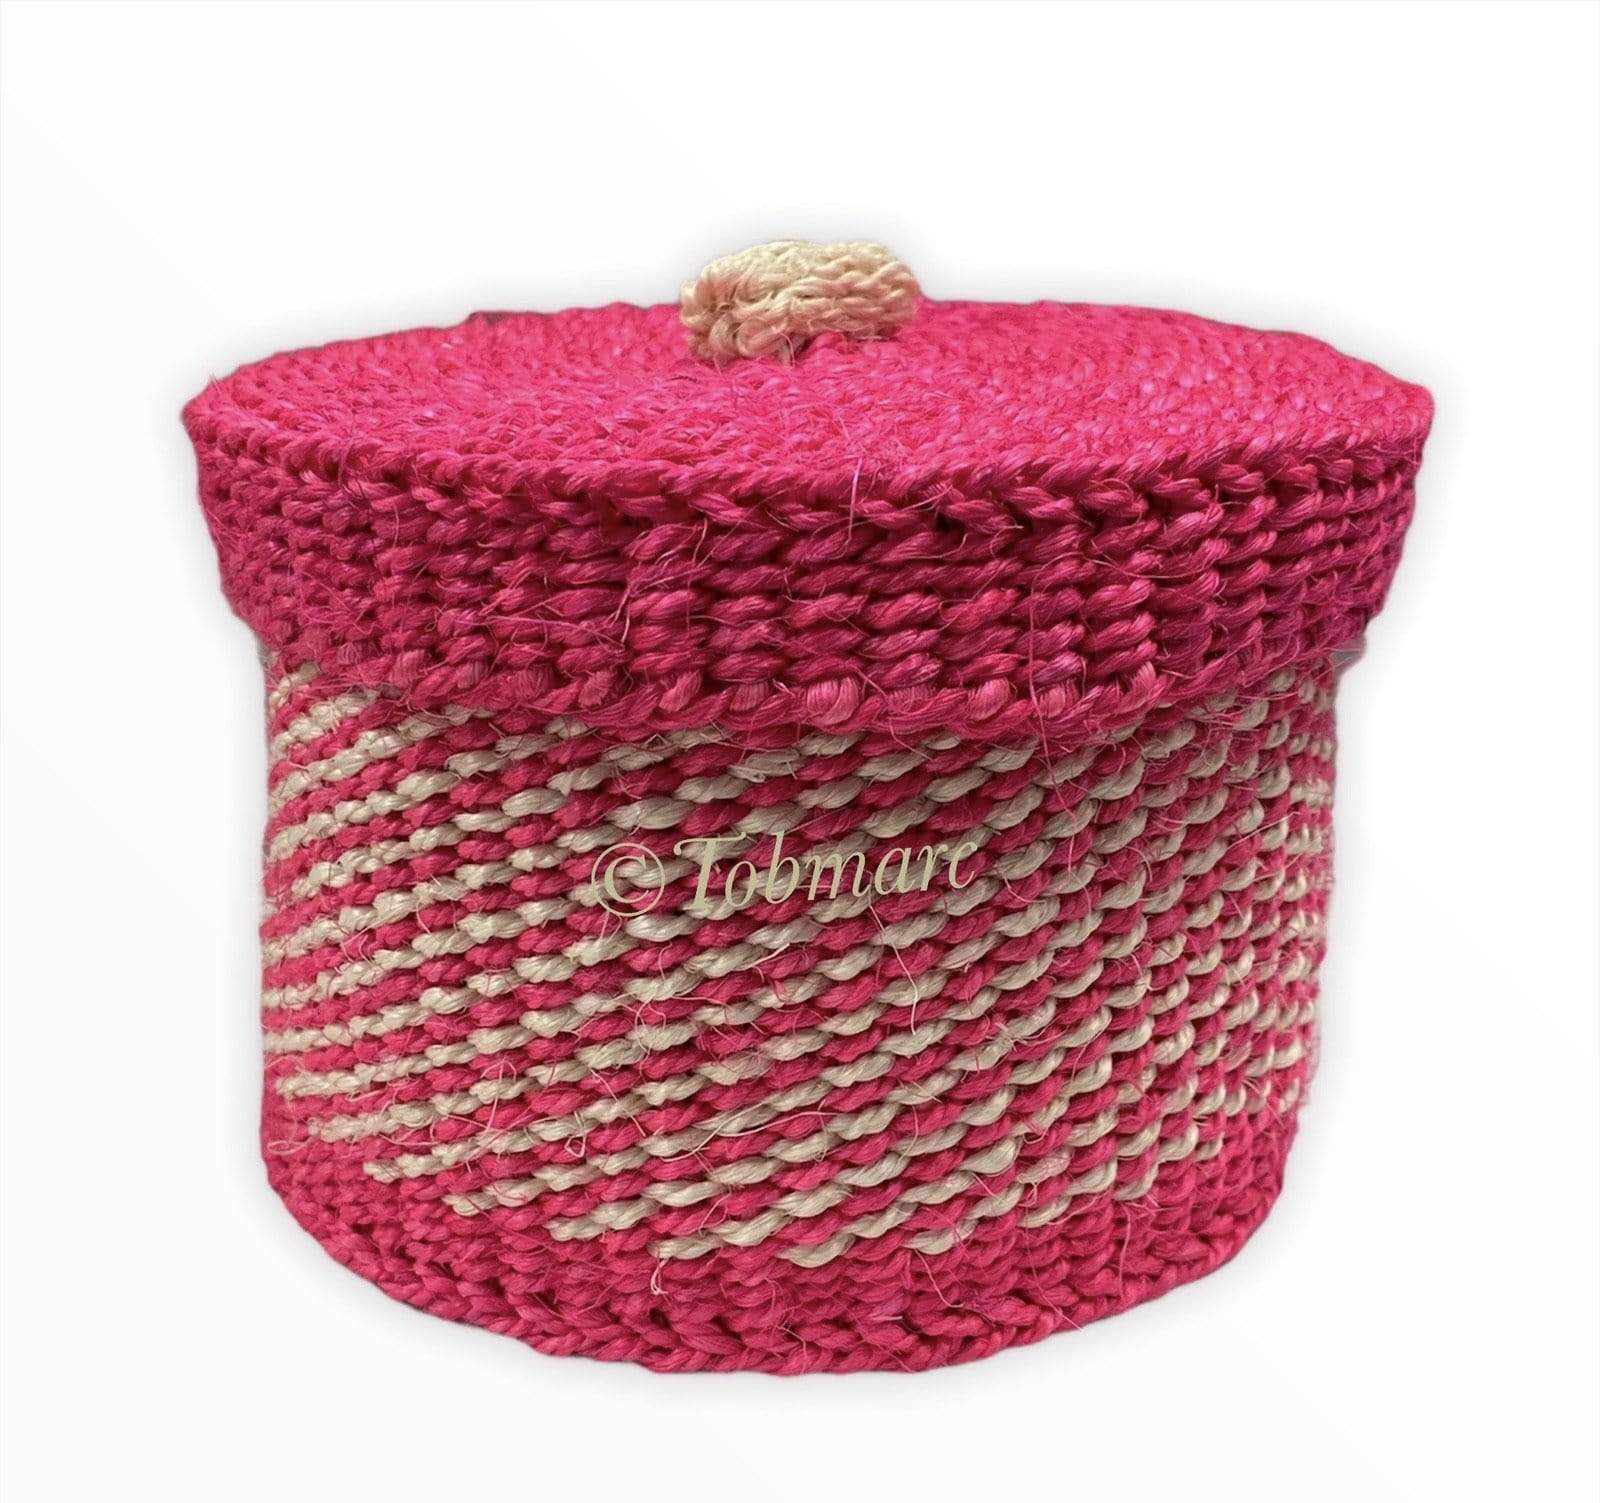 Tobmarc Home Decor & Gifts  Pink and White TWIN-Small Baskets with a Lid, basket storage, Handwoven Mini Basket